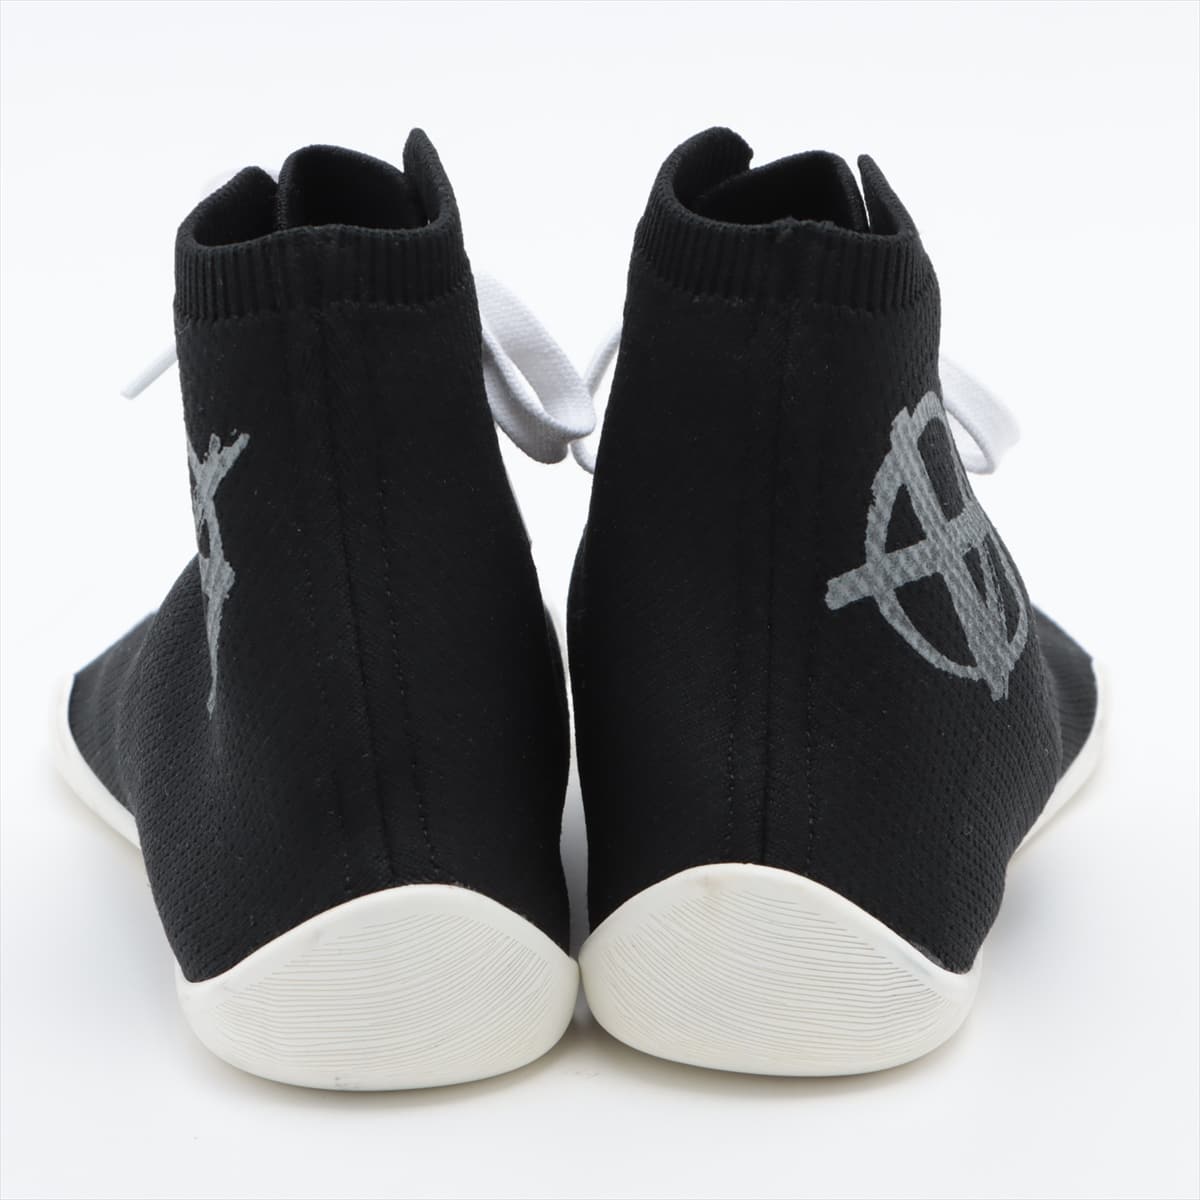 Vetements 19AW Fabric Sneakers 43 Men's Black × White Socks anarchy